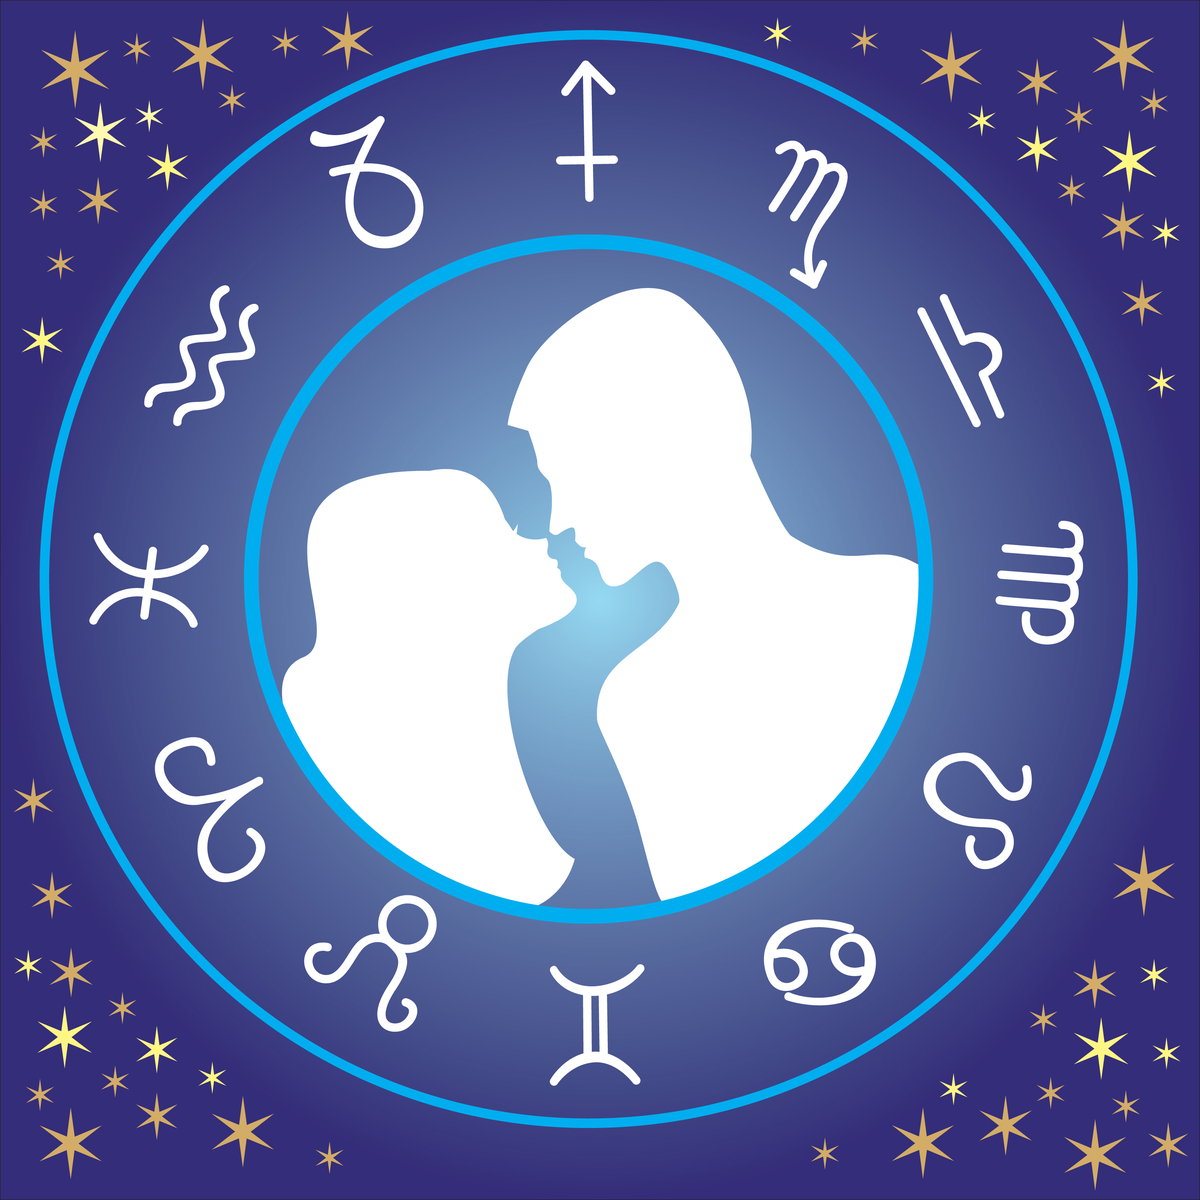 White silhouette of man and woman about to kiss with the zodiac signs framing them in a circle around them.